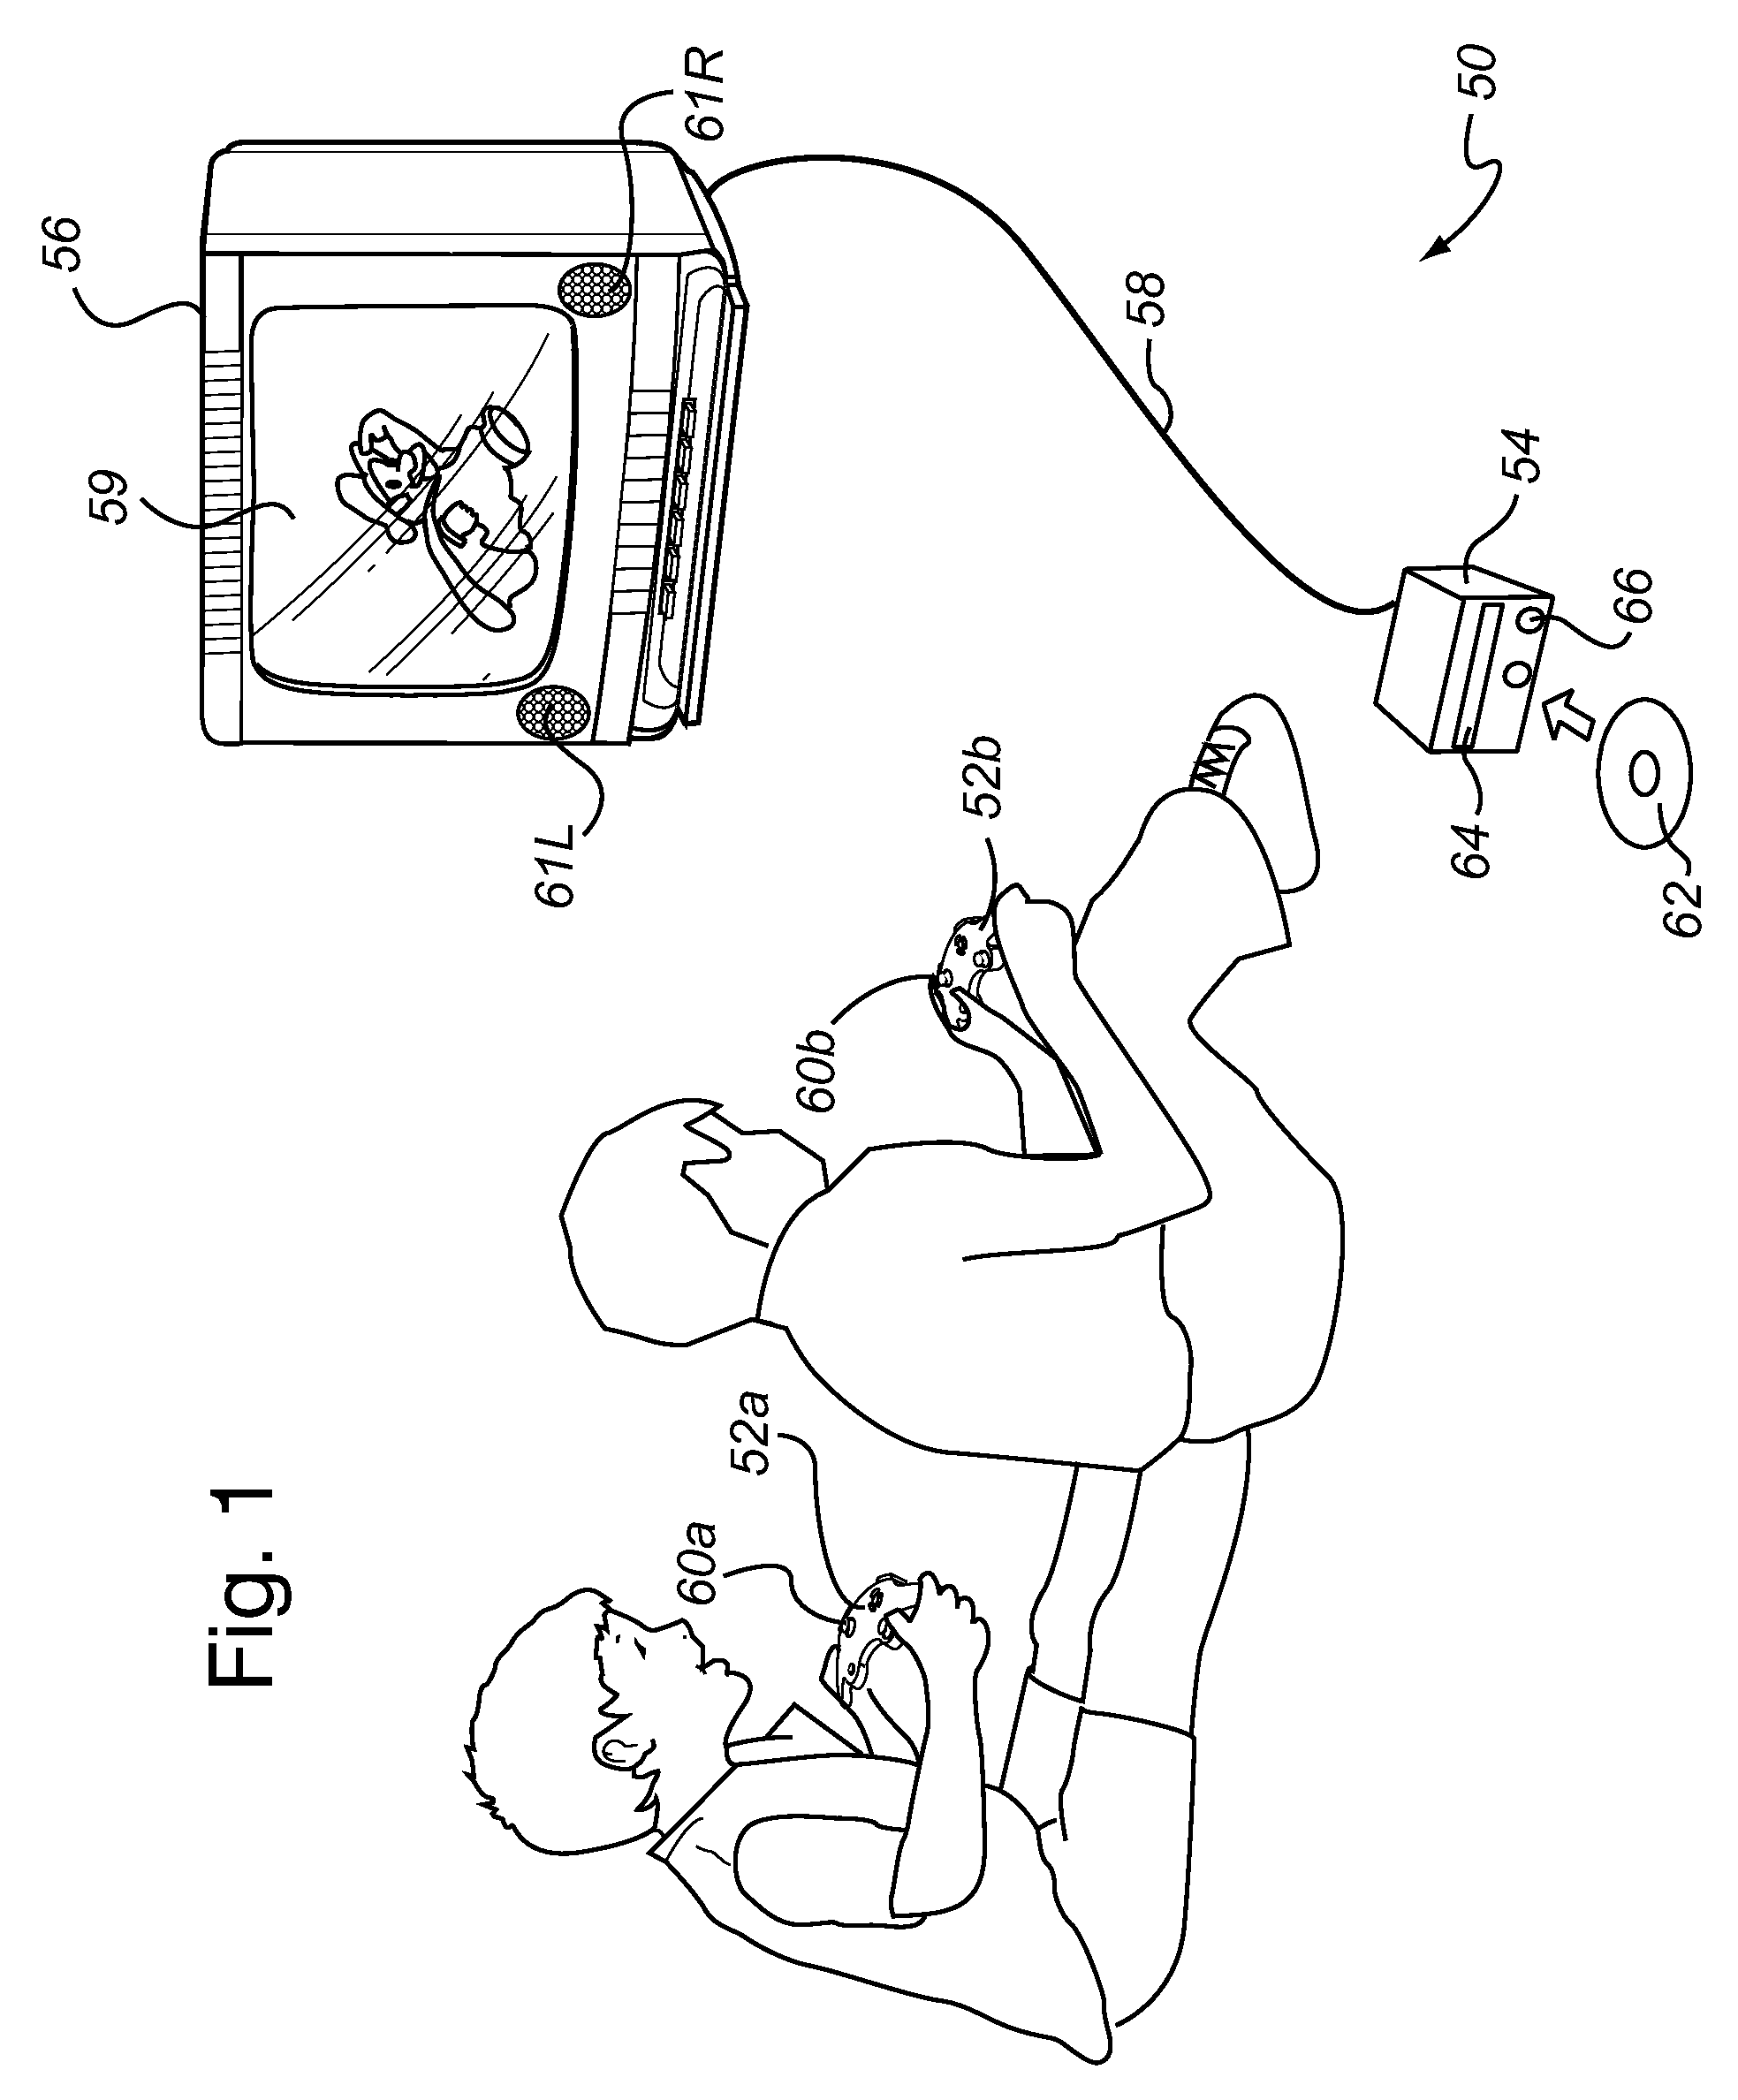 Graphics Processing System with Enhanced Memory Controller